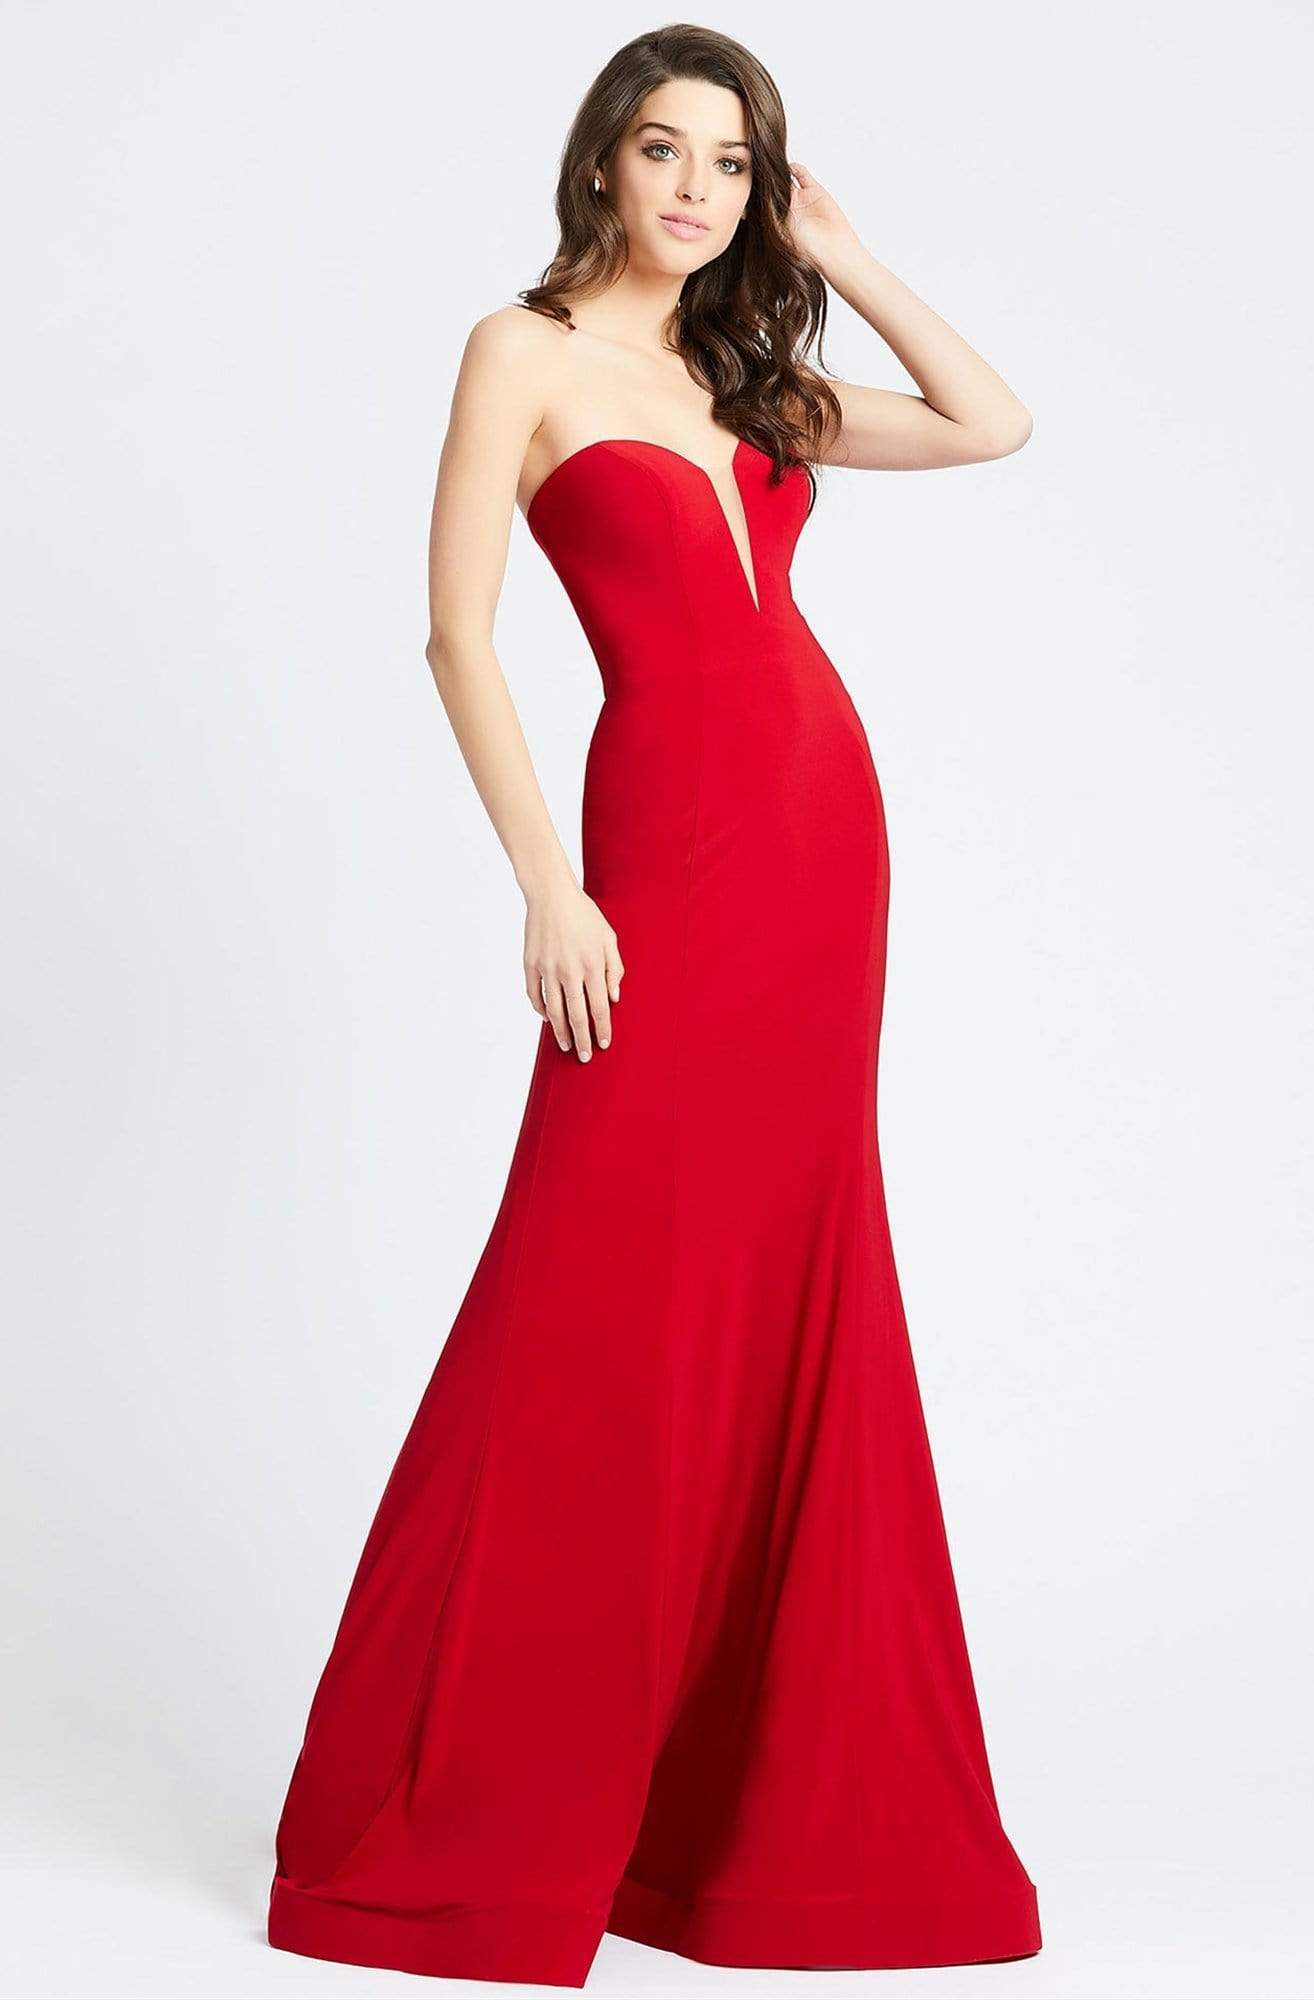 Ieena Duggal - 55233I Plunging Sweetheart Illusion Evening Gown in Red Special Occasion Dress 0